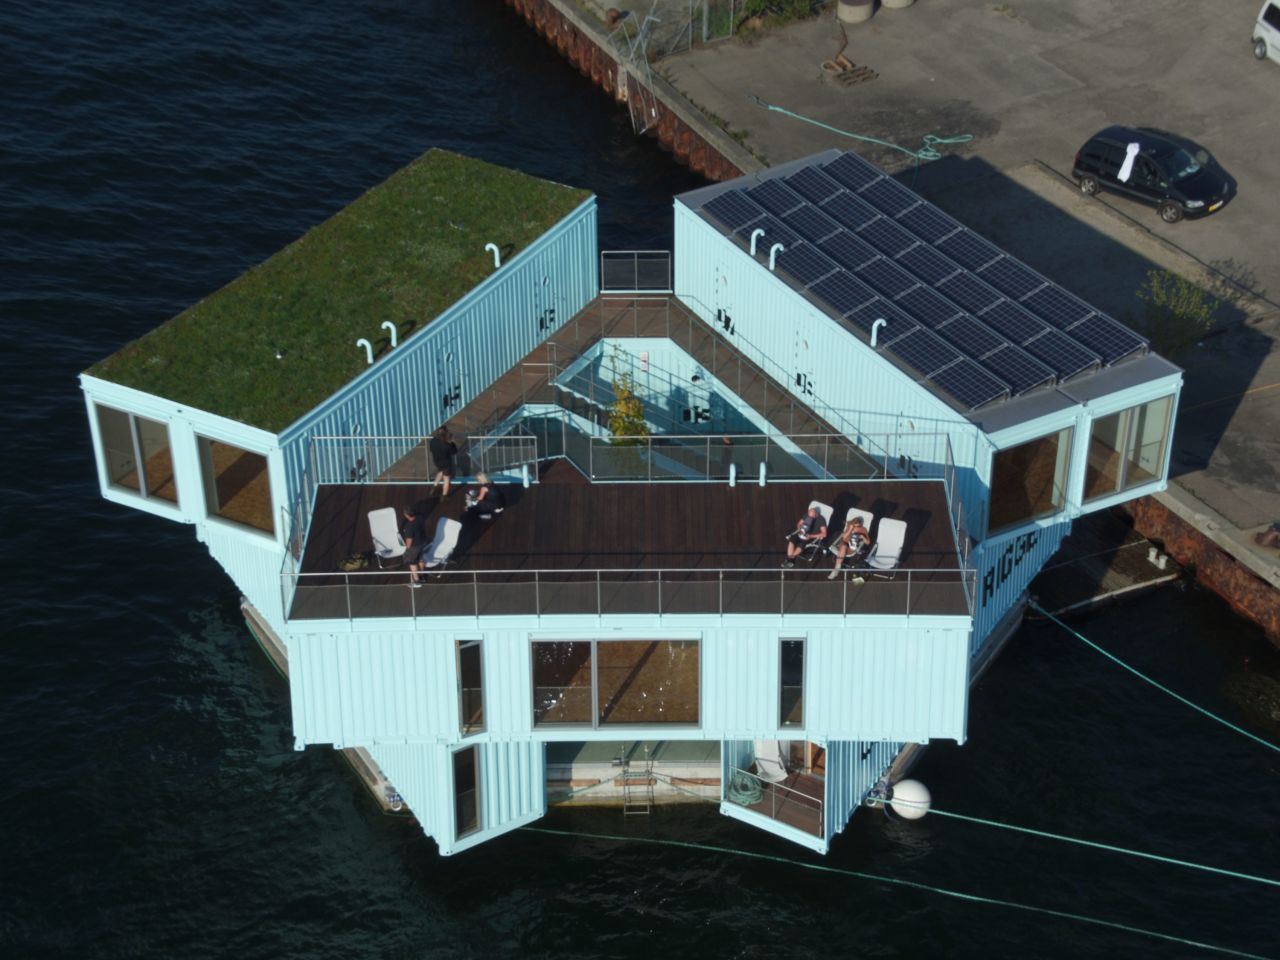 Conceived as a solution to rising housing prices in major cities, BIG's Urban Rigger is built with re-purposed shipping containers. It is the first floating, carbon neutral housing made from shipping containers.